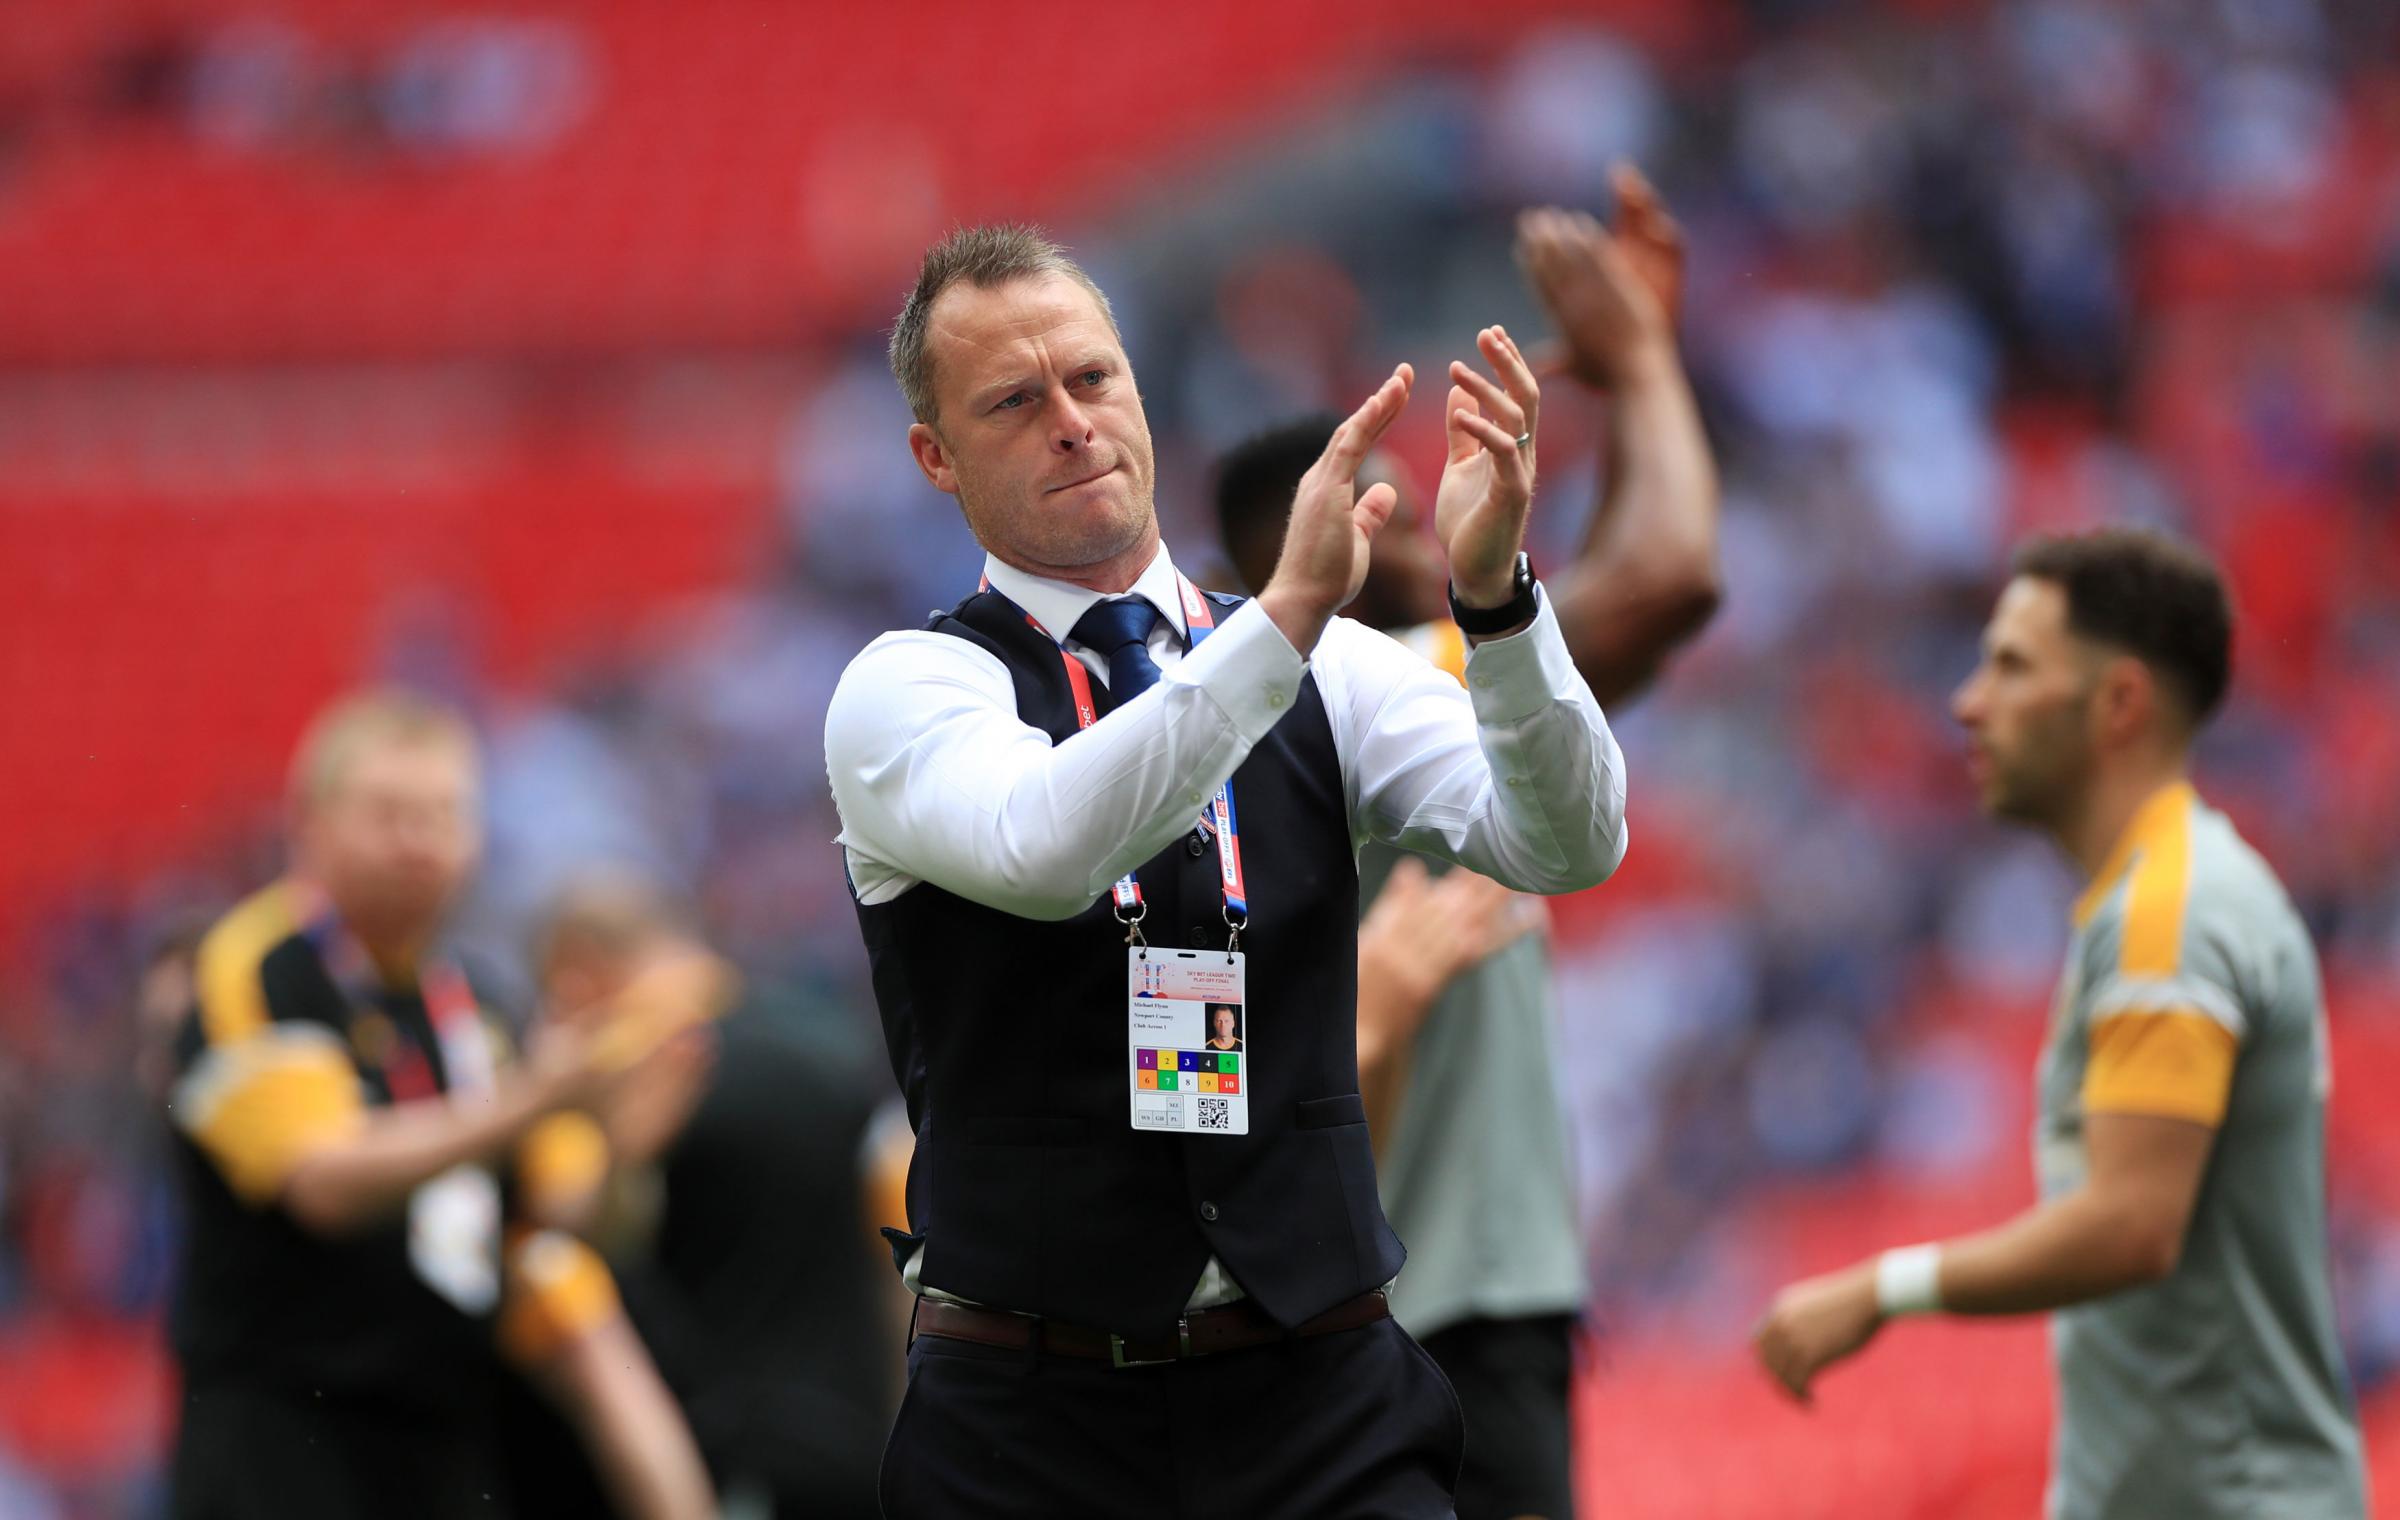 Newport County manager Michael Flynn at the 2019 play-off final